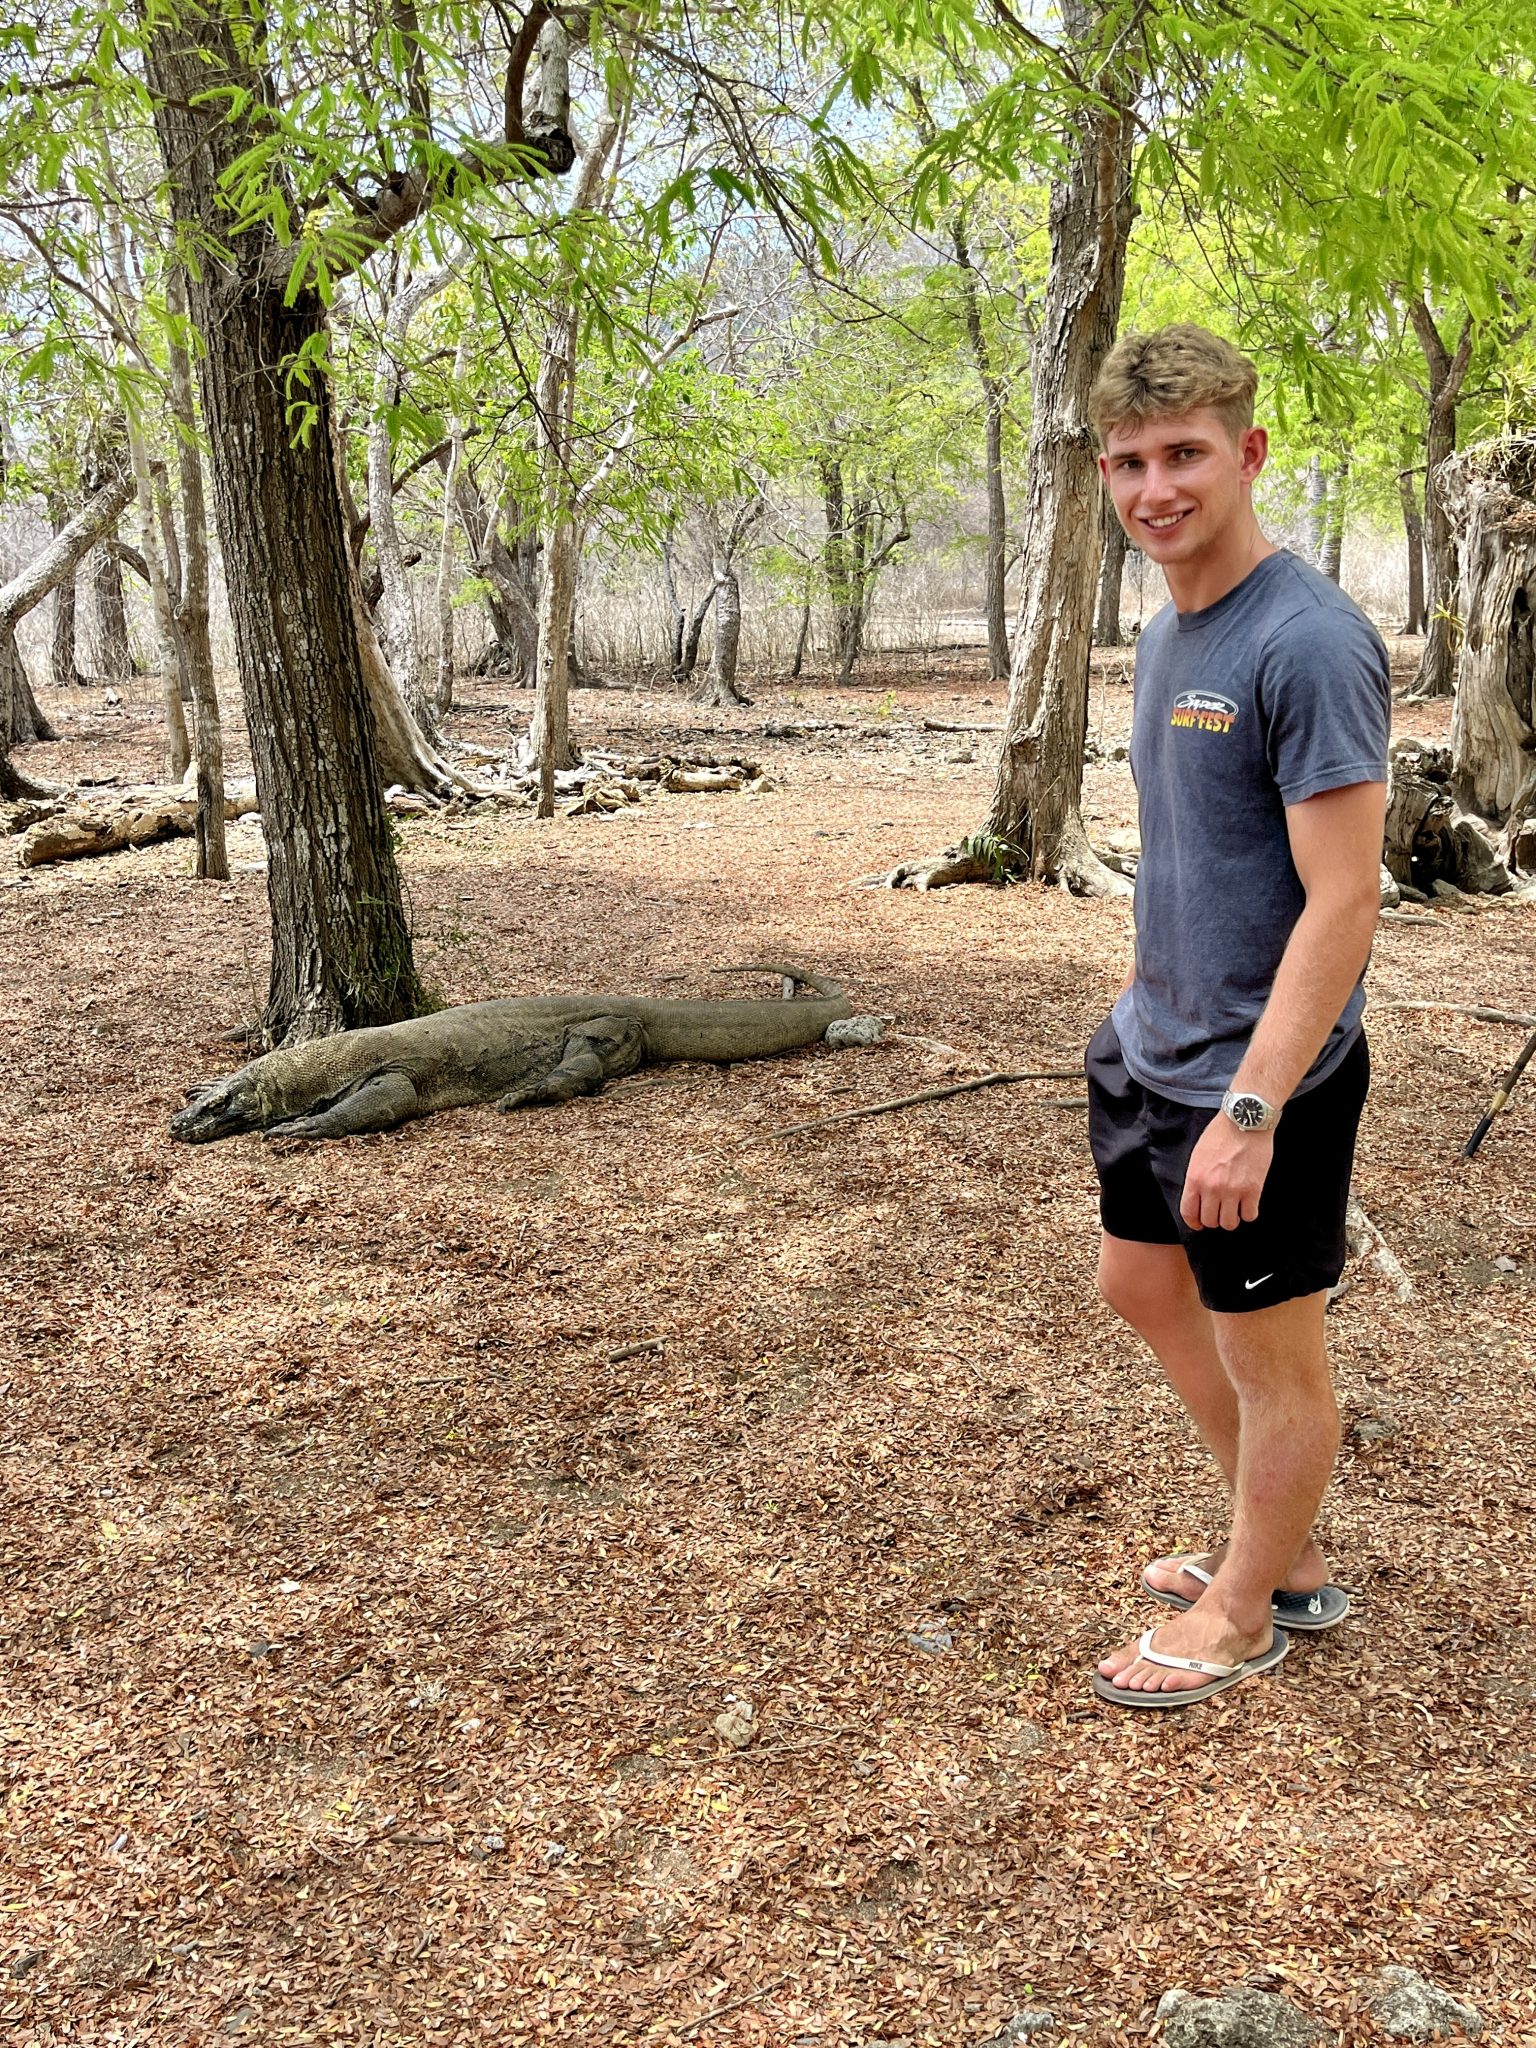 The kids were amazed at the Komodo dragons, even though they were snoozing